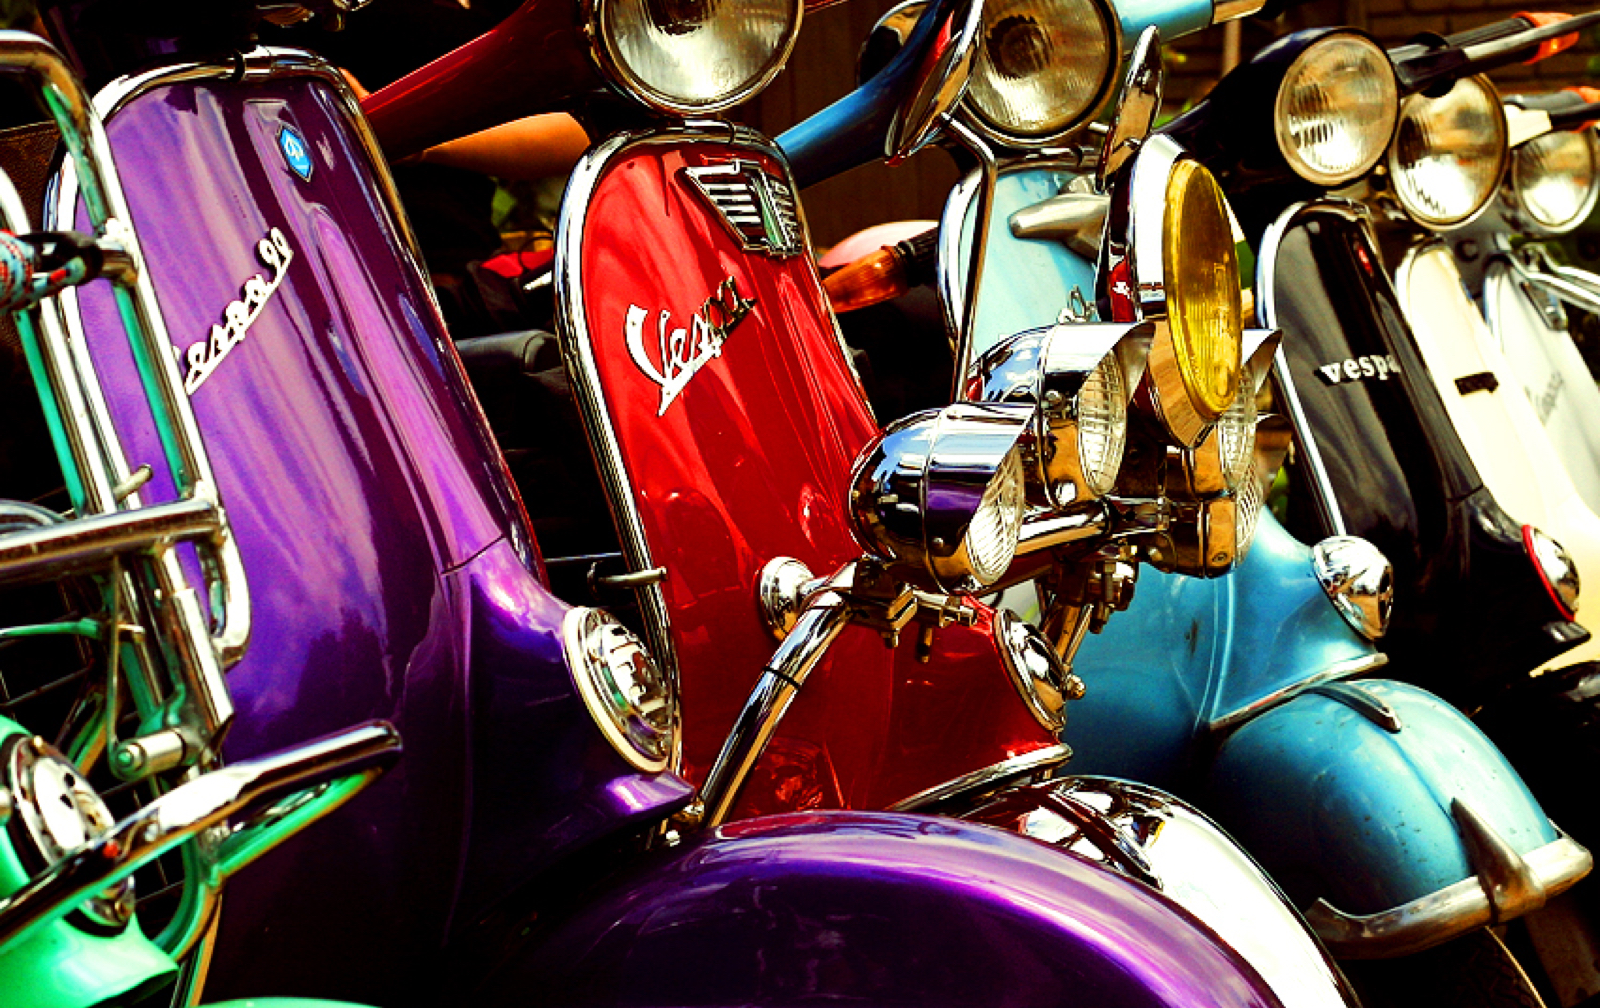 Photograph of motorcycles